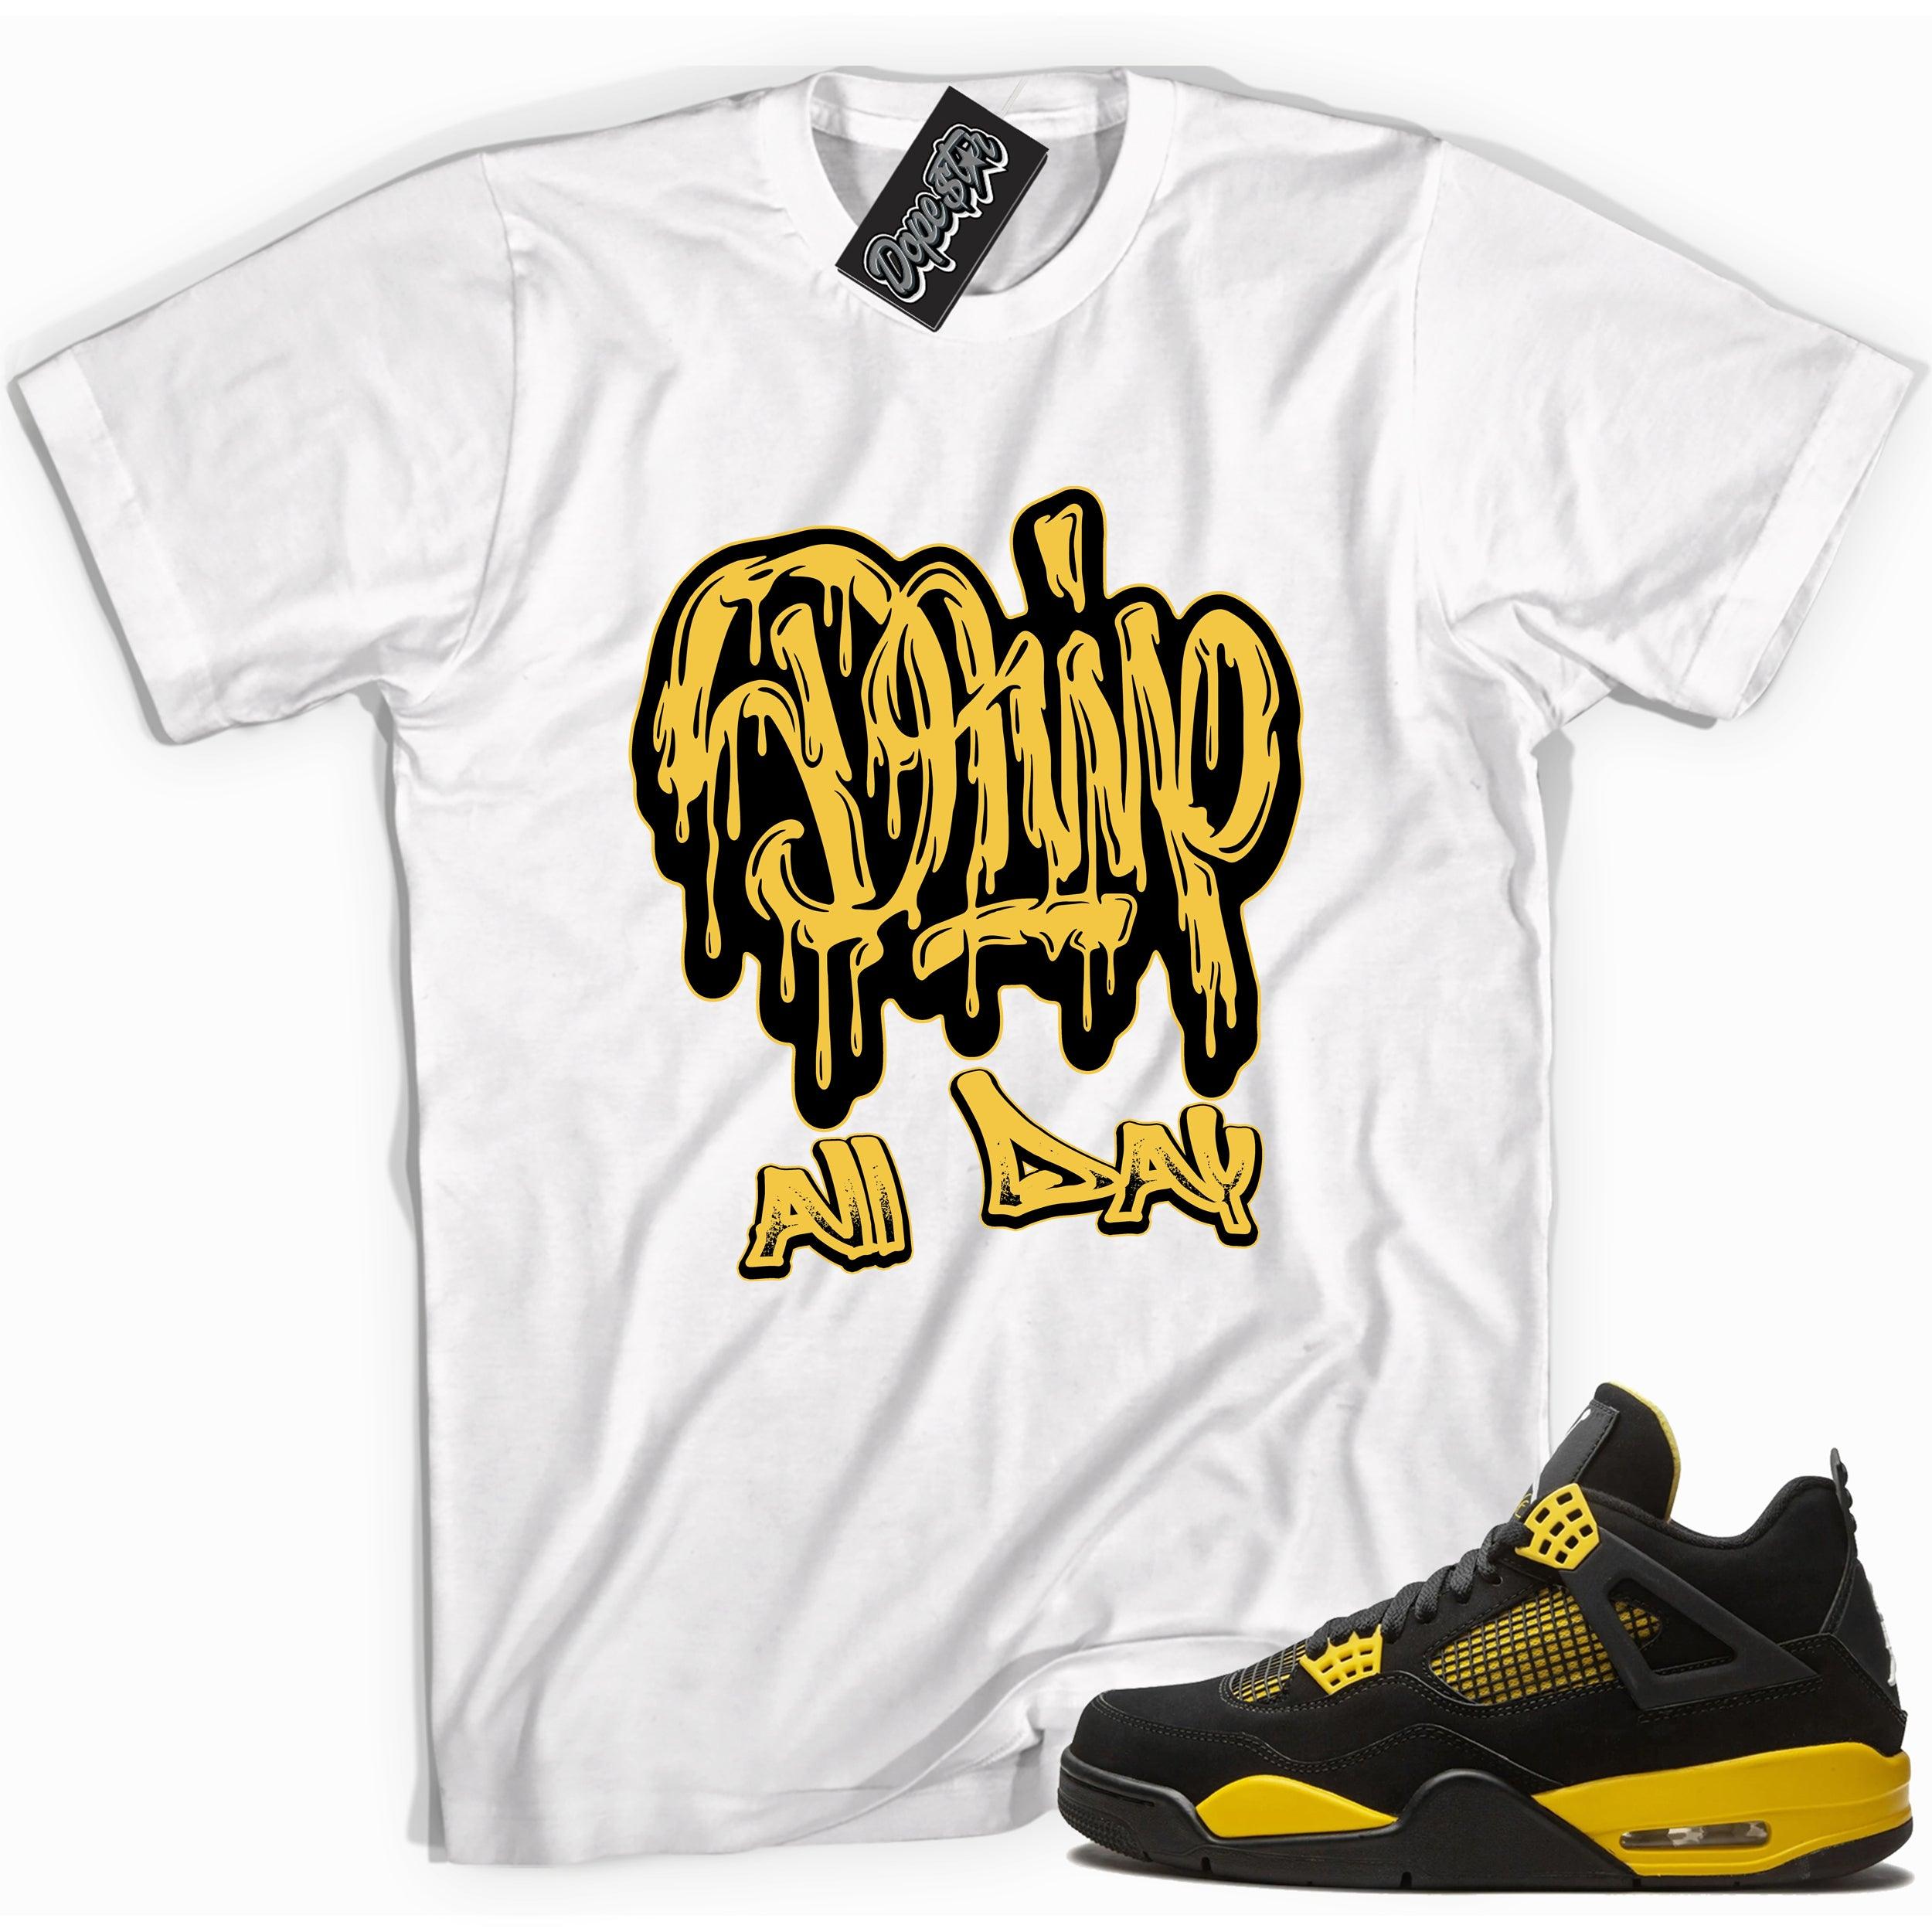 Cool white graphic tee with 'drip all day' print, that perfectly matches Air Jordan 4 Thunder sneakers